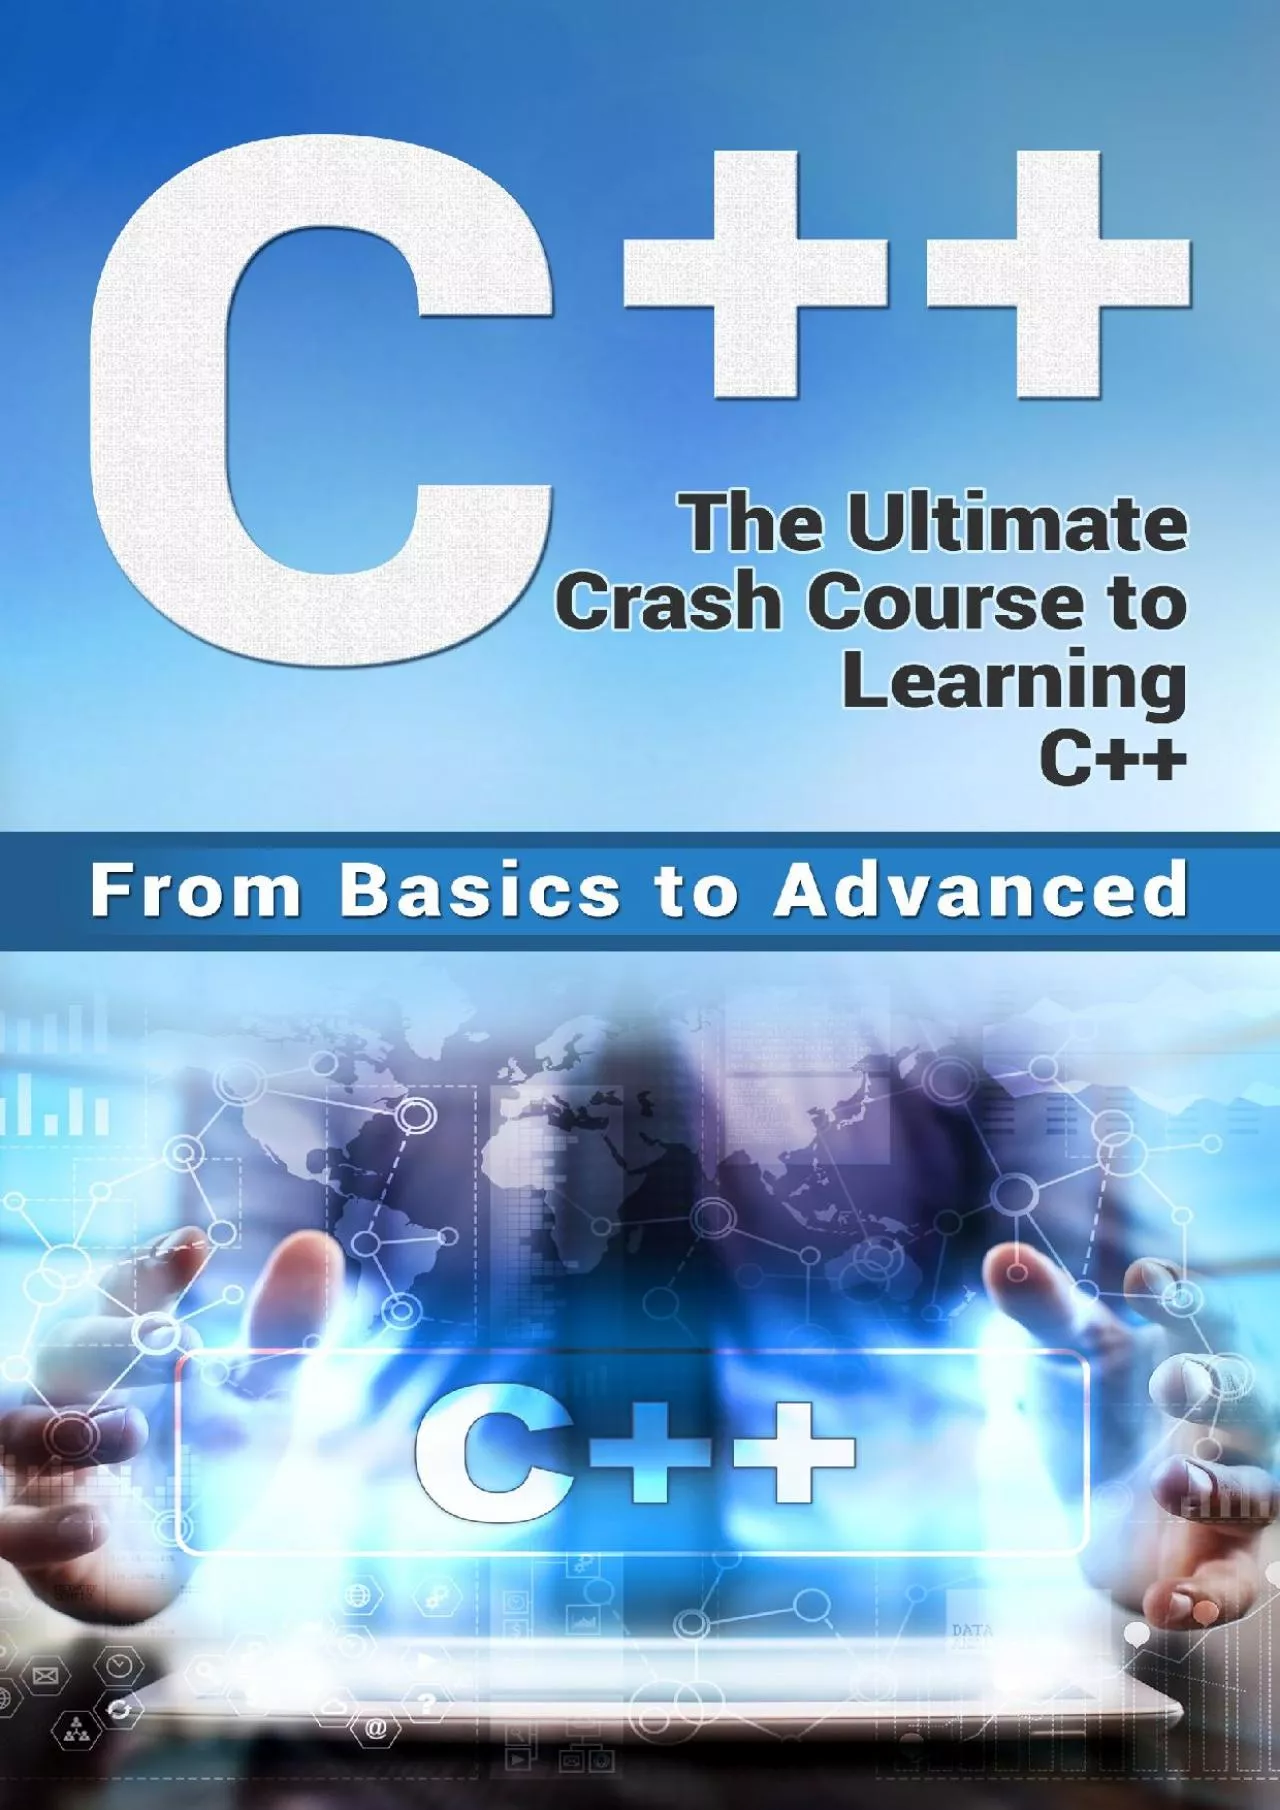 [FREE]-C++: The Ultimate Crash Course to Learning C++ (from basics to advanced) (guide,C